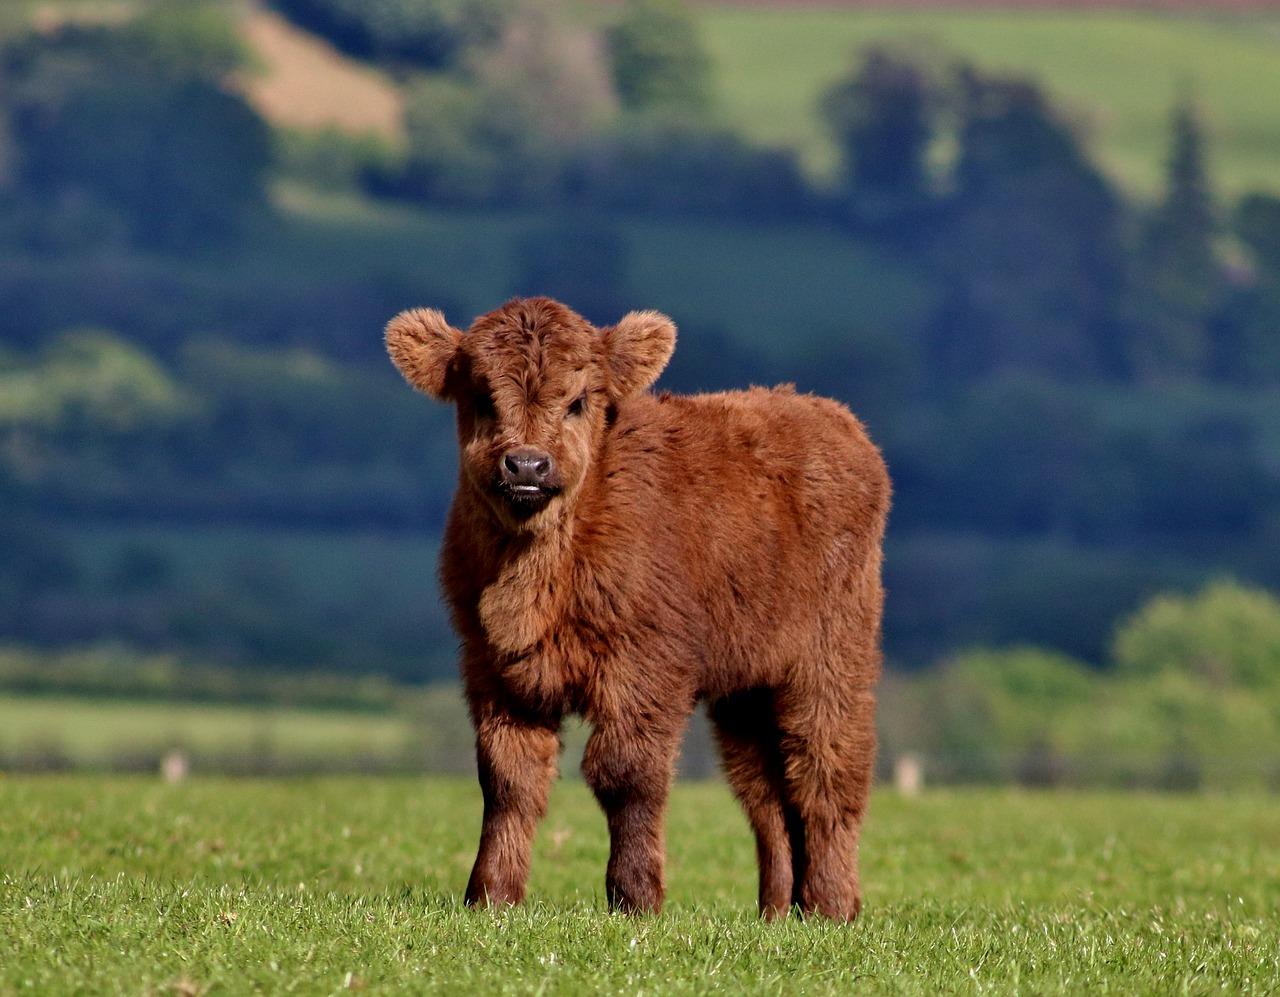 A young Highland cow